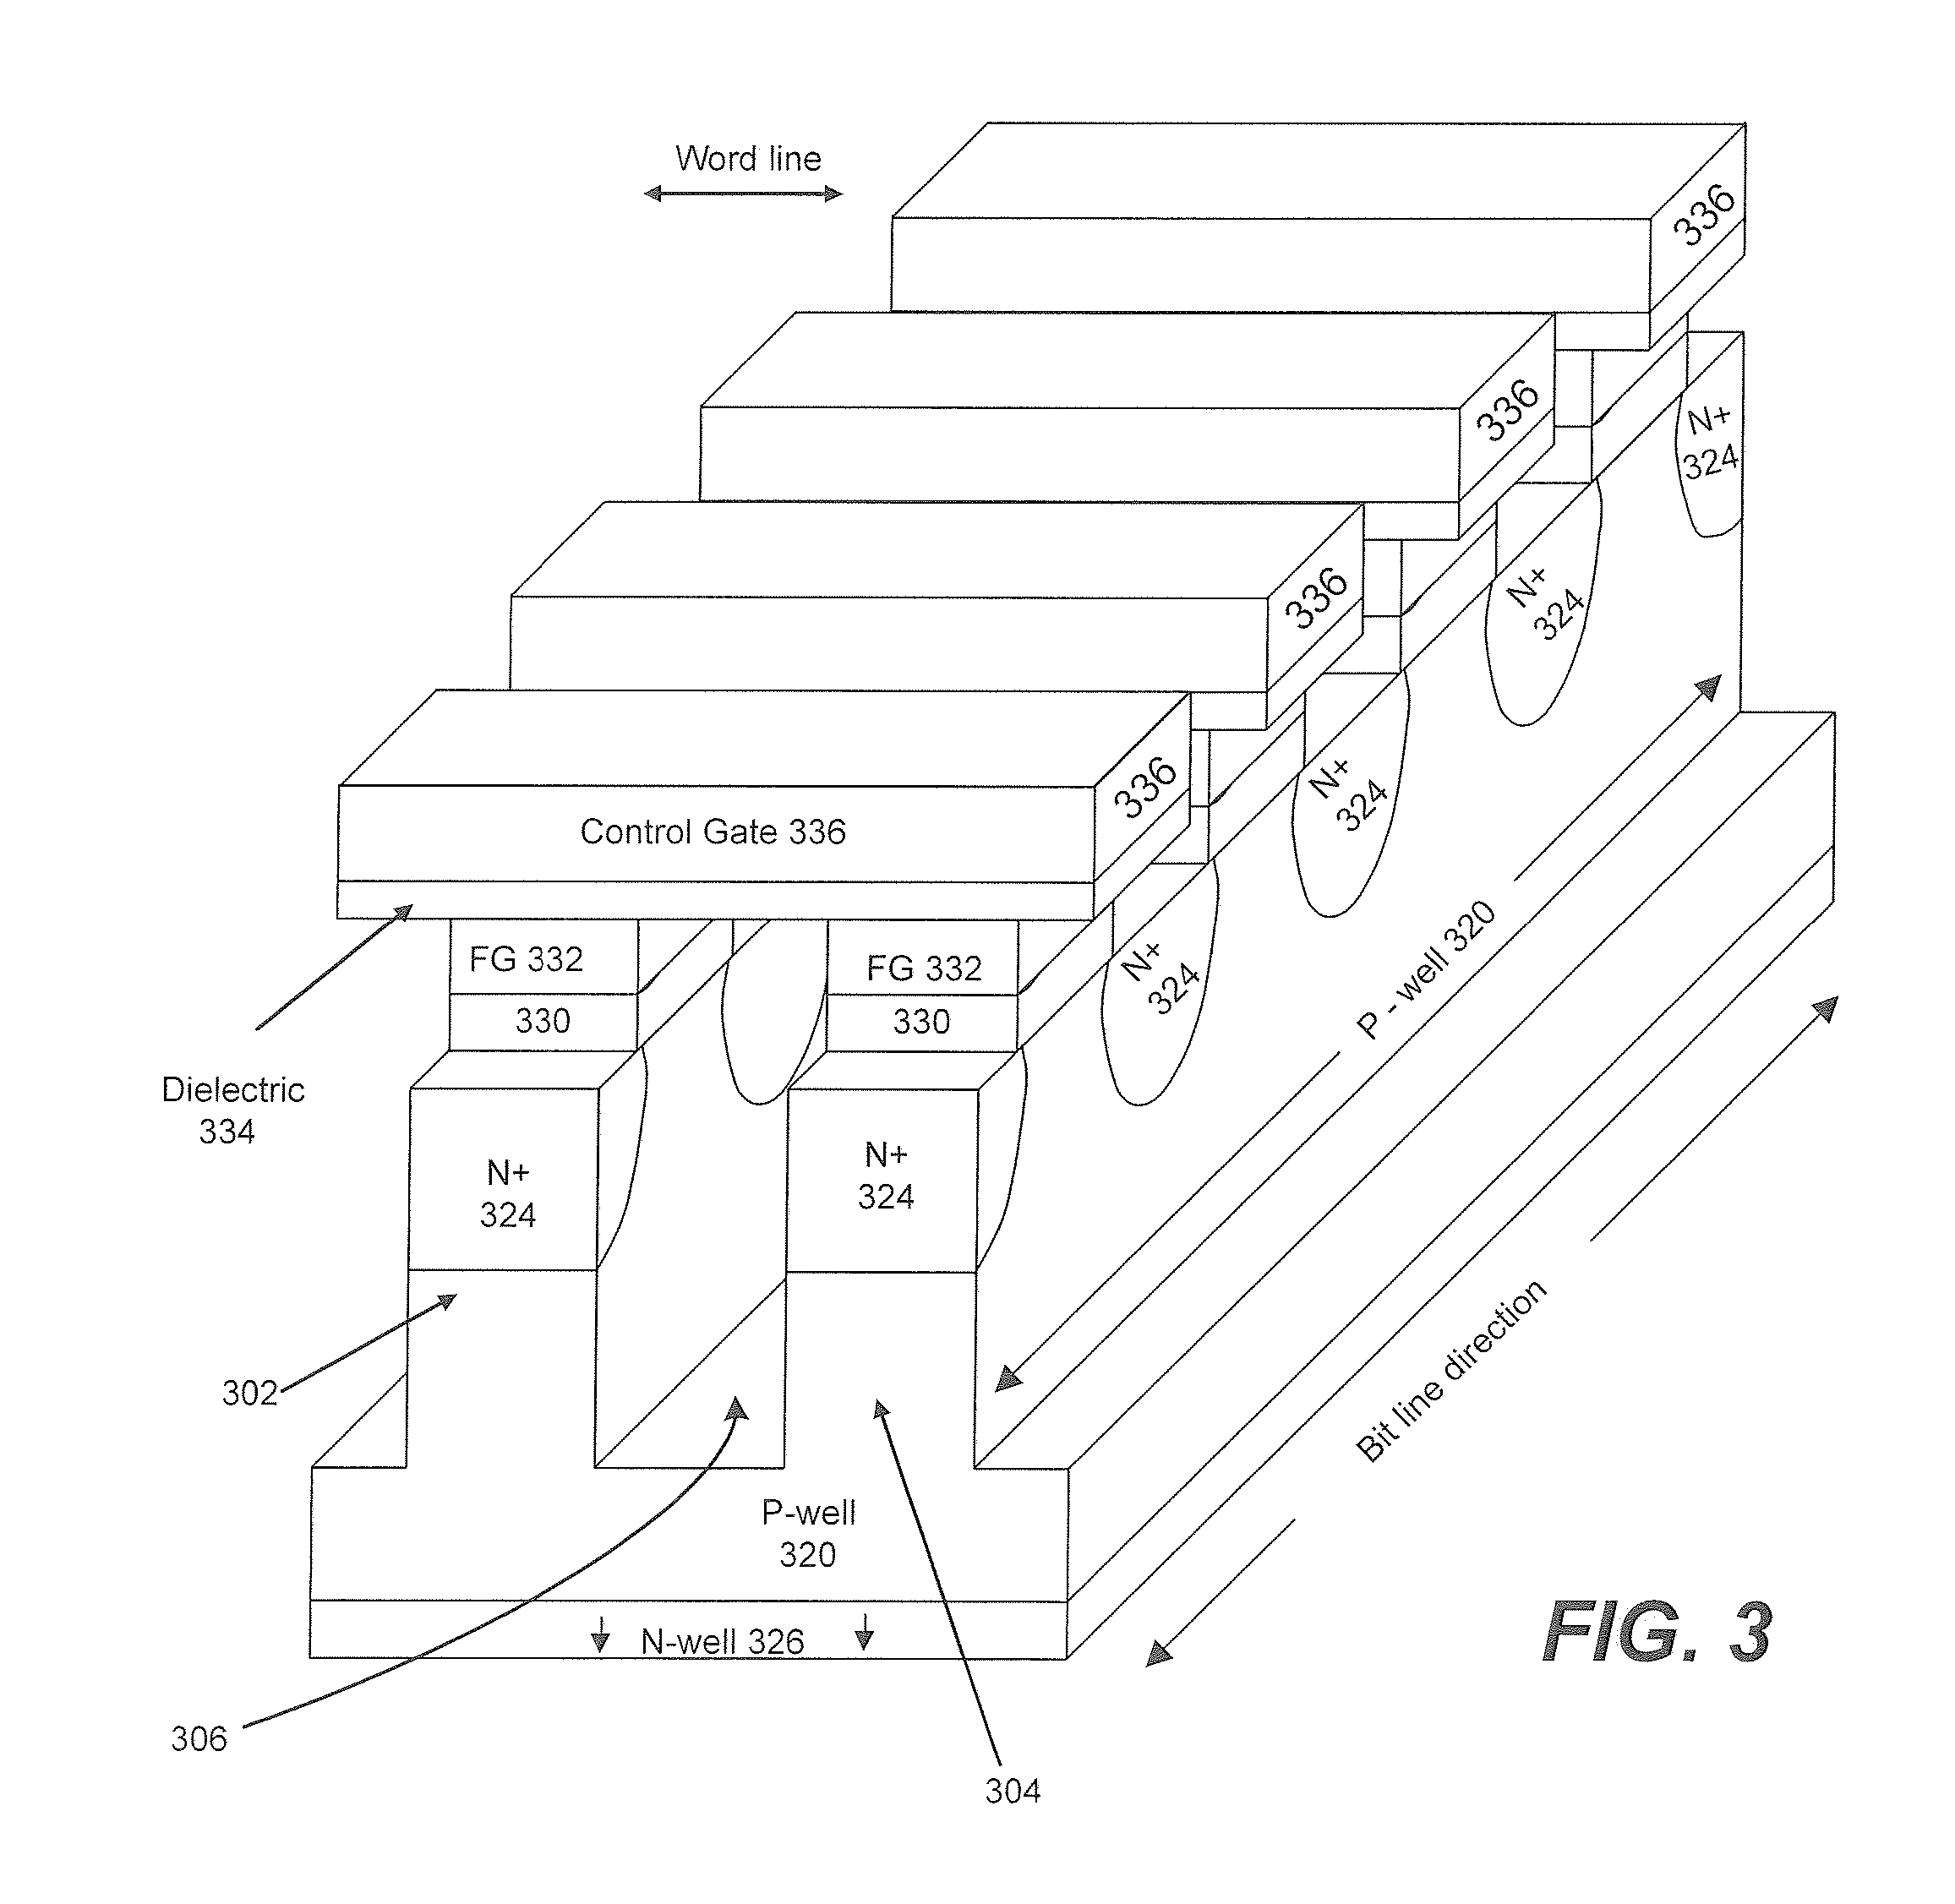 Spacer Patterns Using Assist Layer for High Density Semiconductor Devices